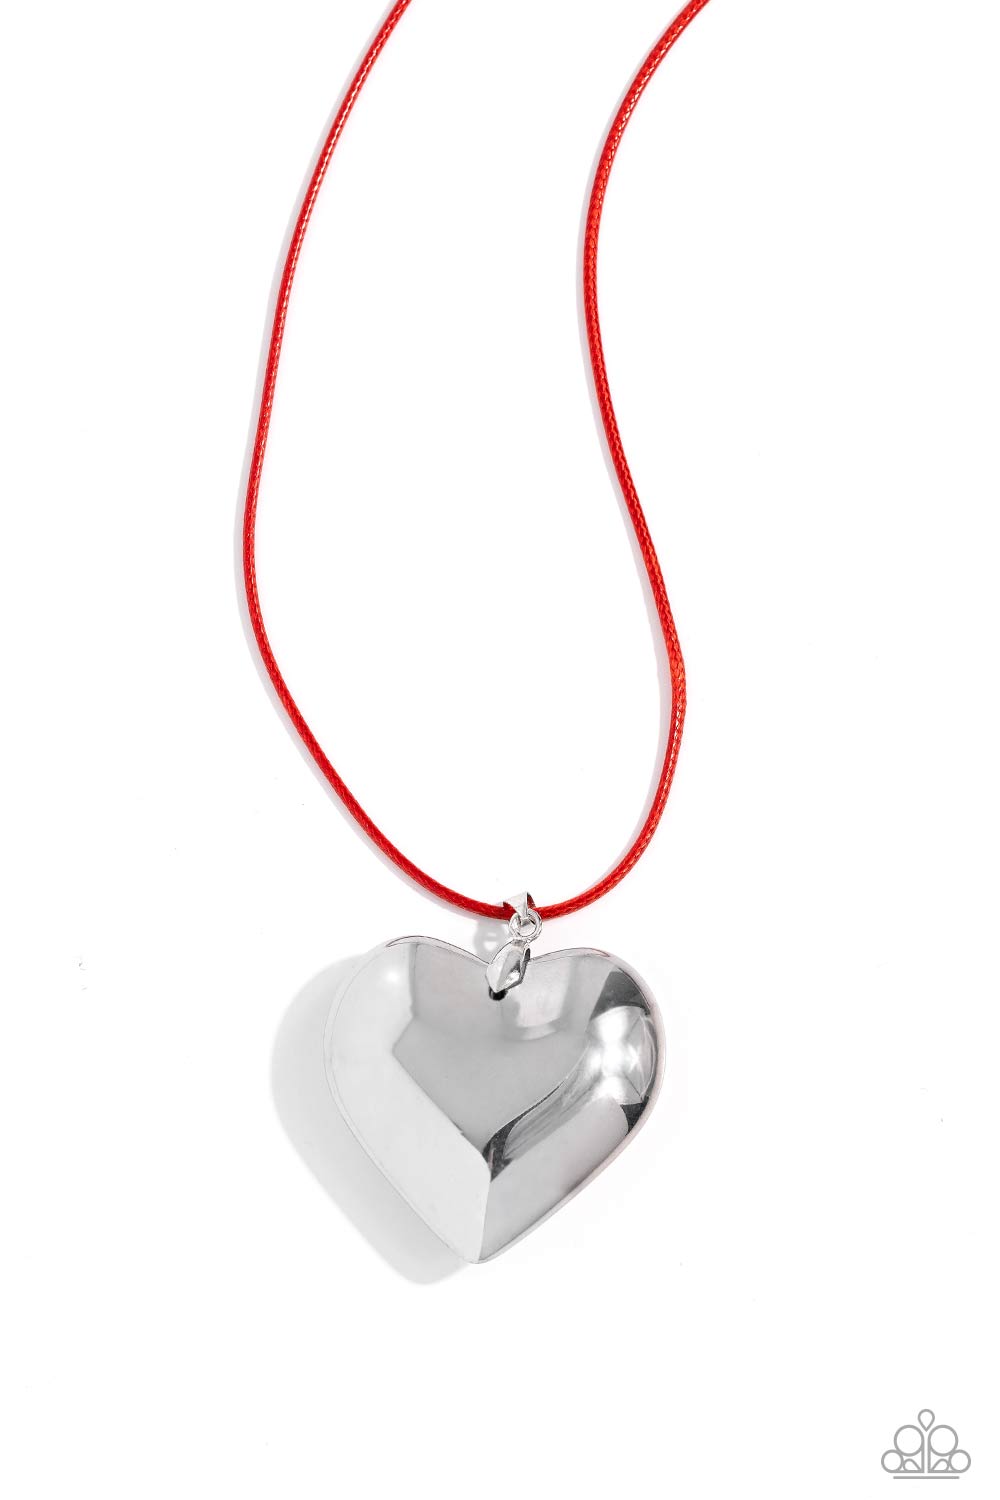 Devoted Daze Red & Silver Heart Necklace - Paparazzi Accessories- lightbox - CarasShop.com - $5 Jewelry by Cara Jewels